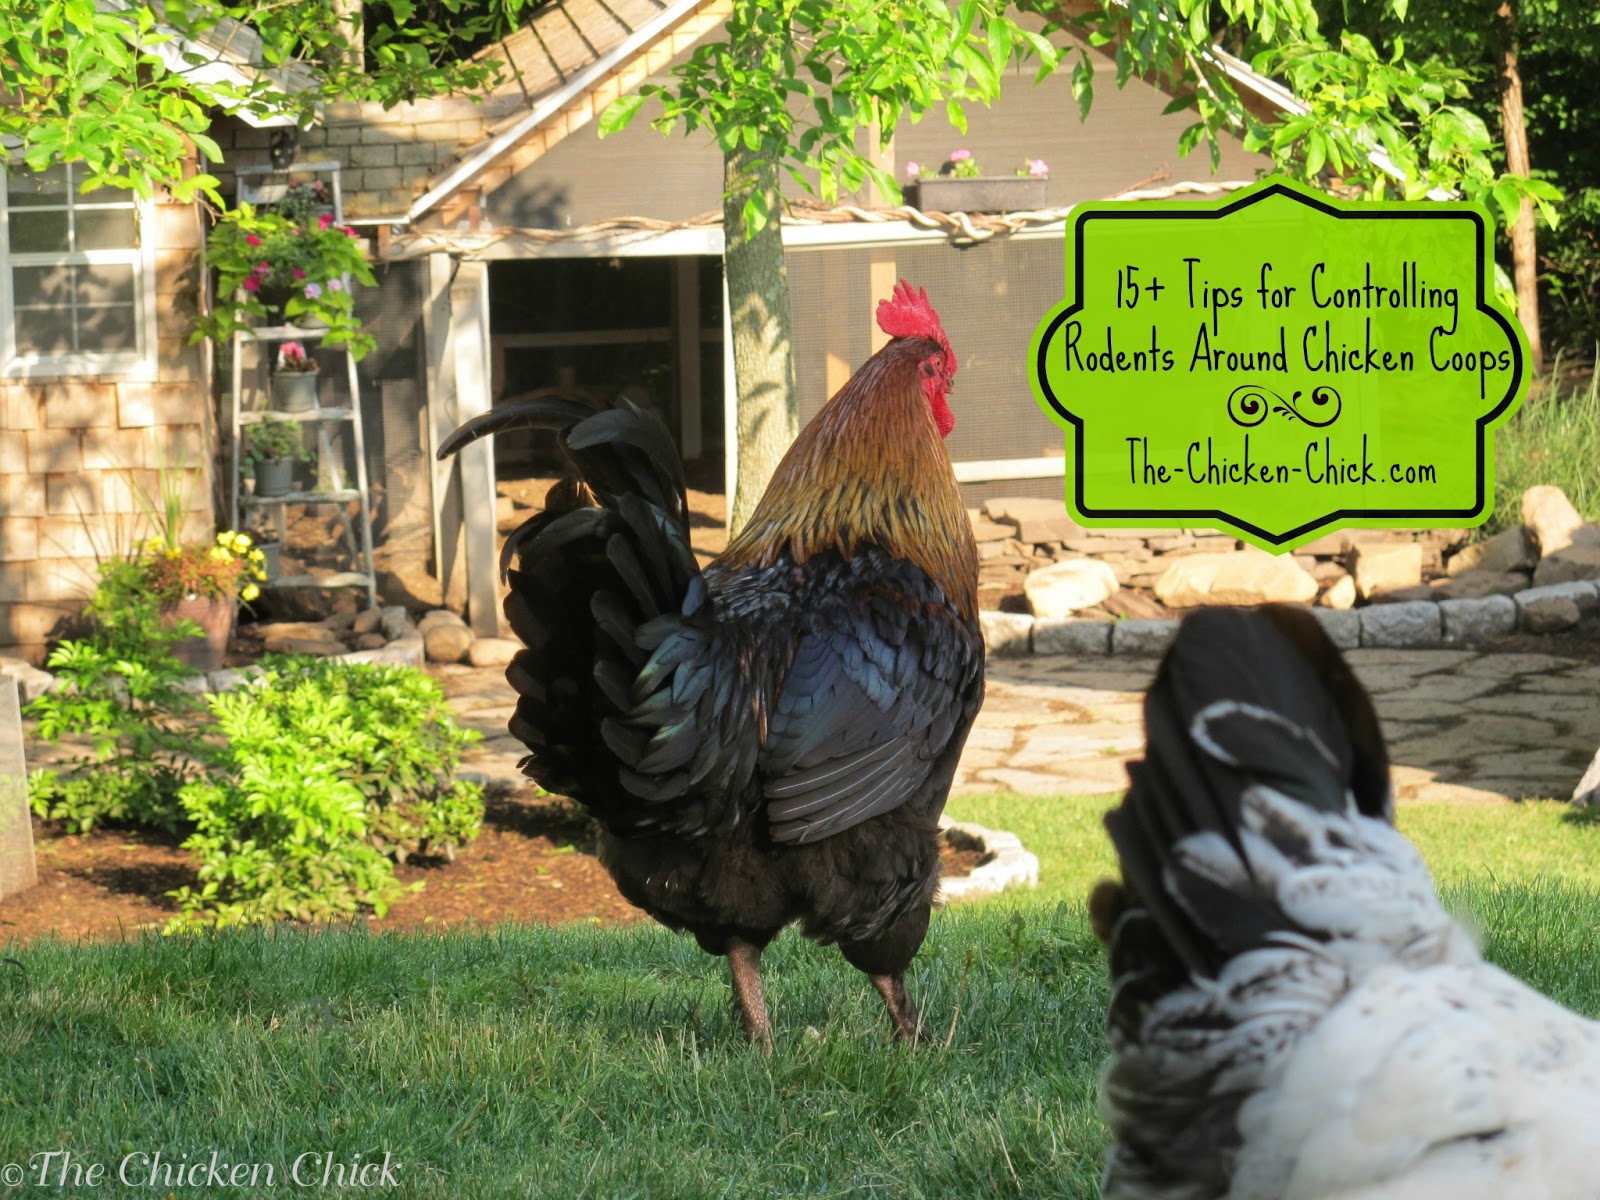  the other risks and how to get rid of rodents around the chicken coop